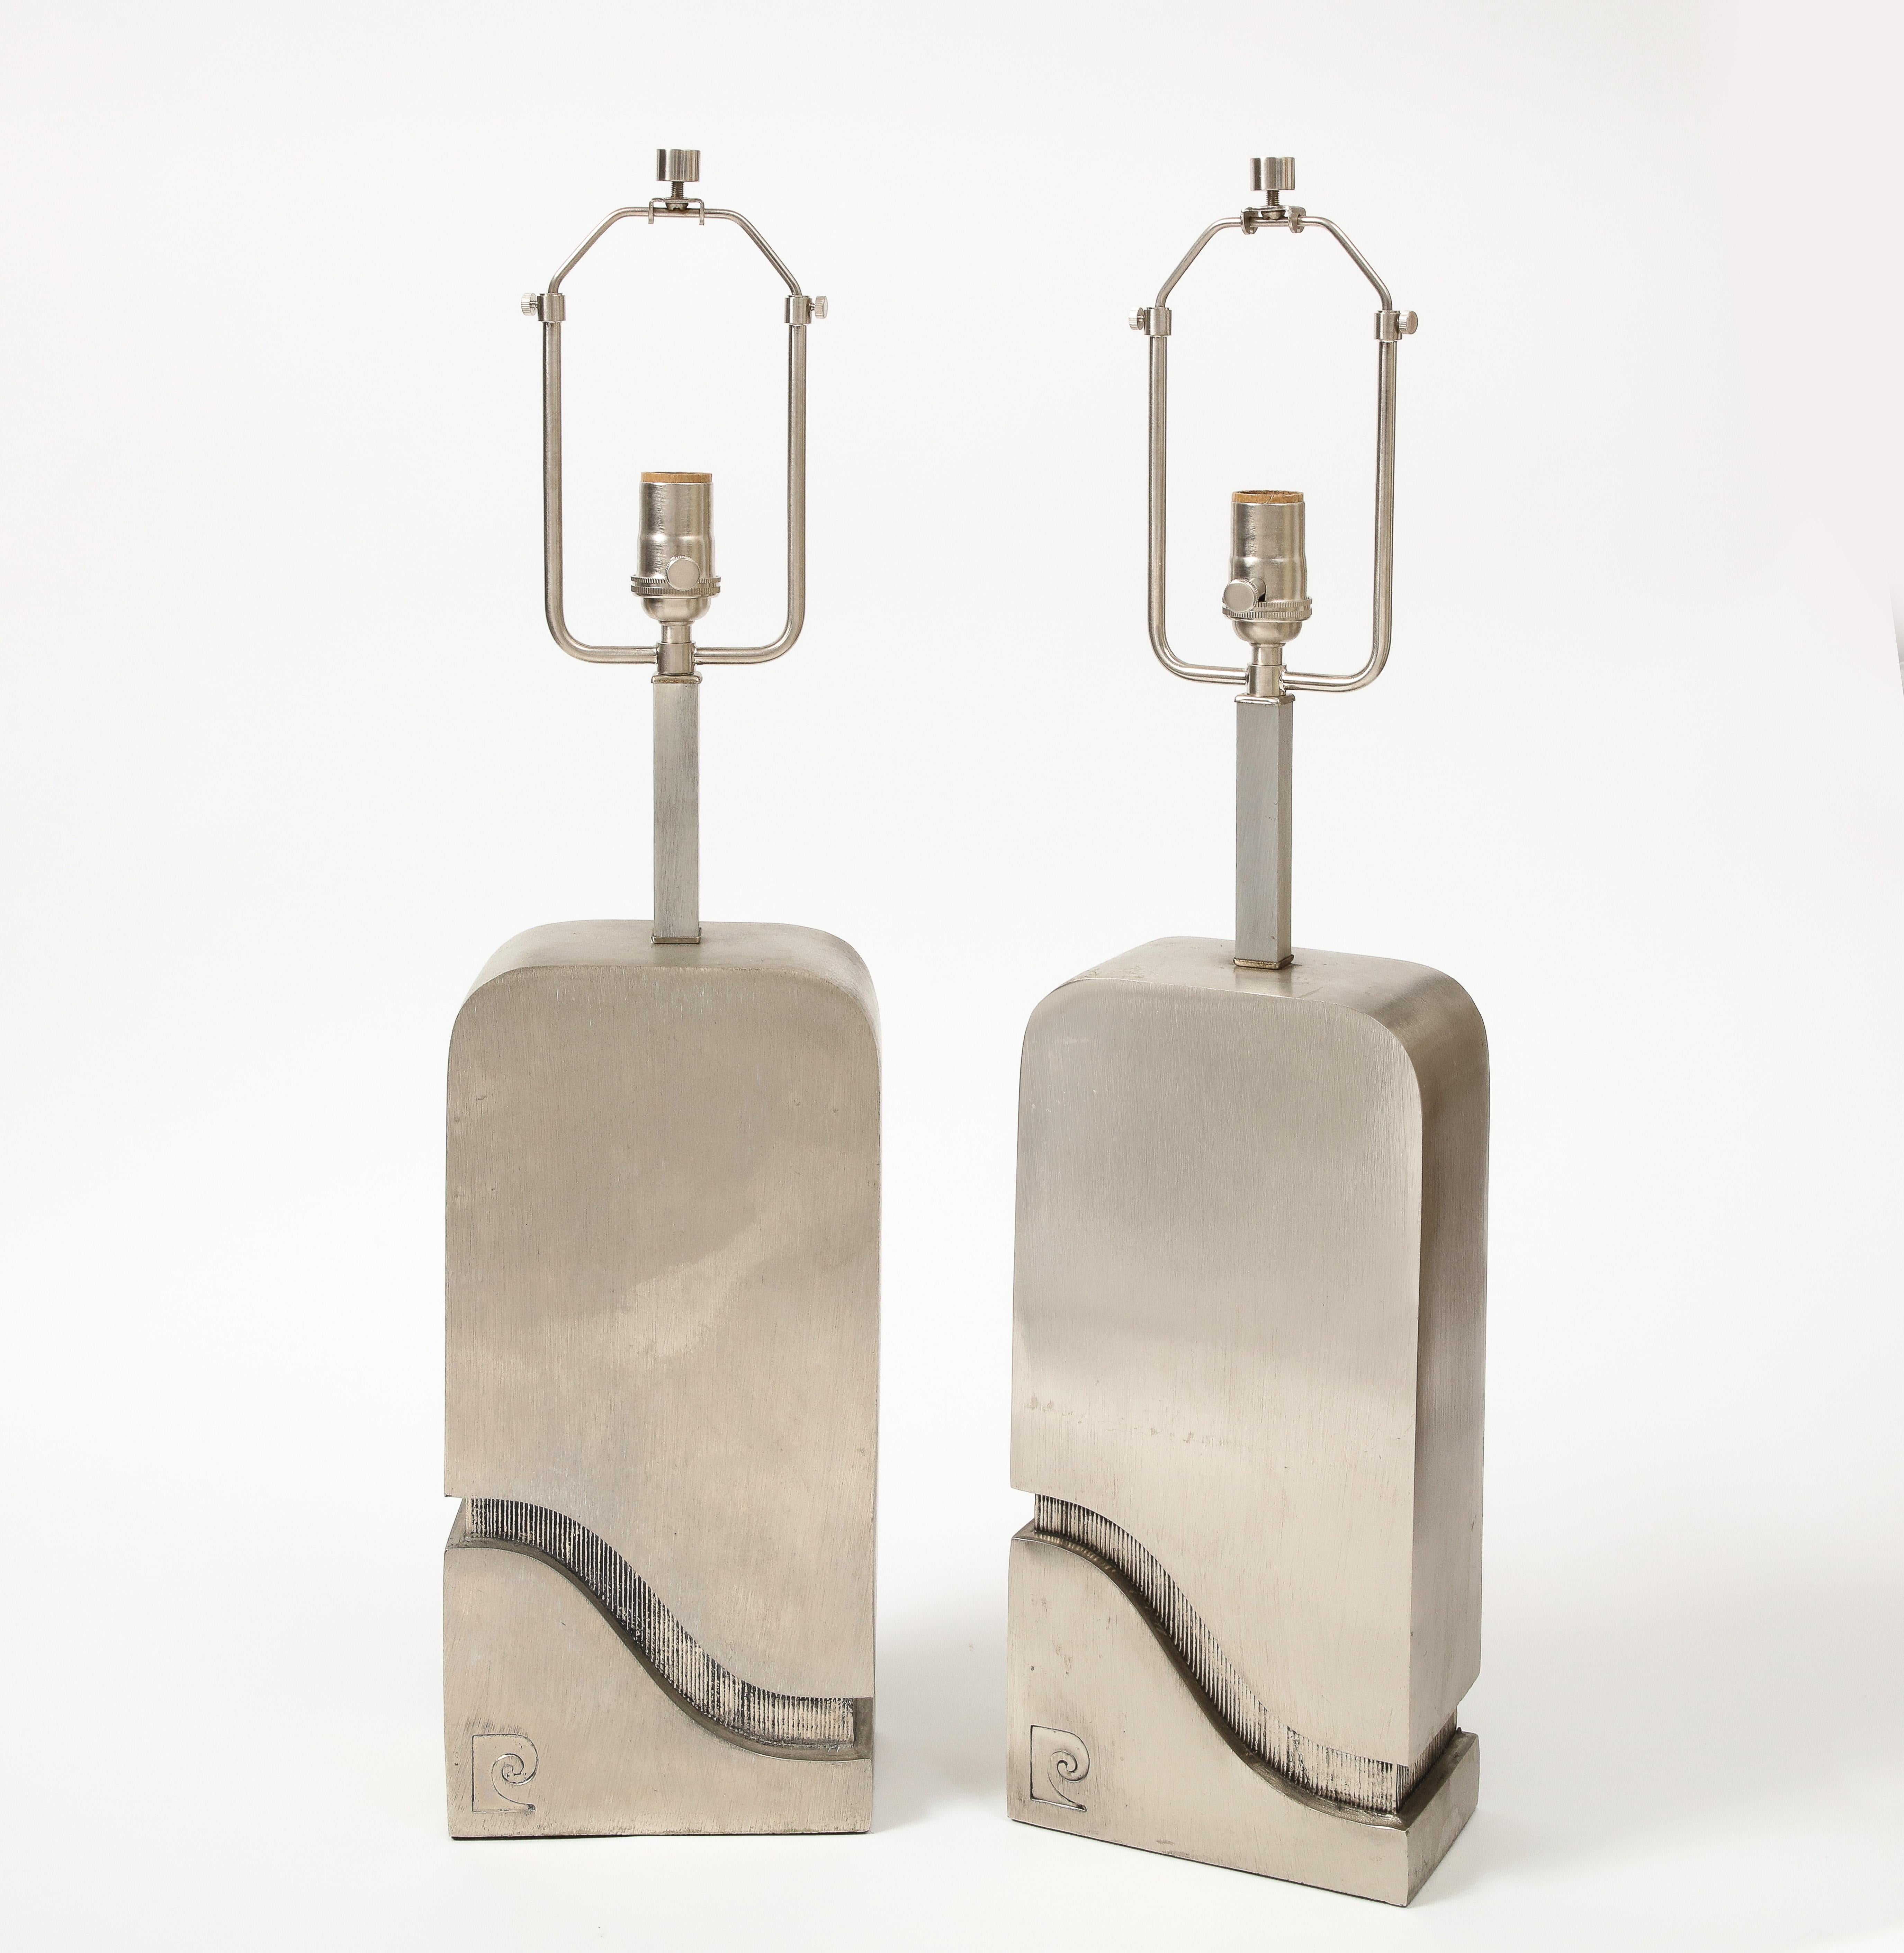 Price is per lamp; two available.

Brushed steel 'waterfall' table lamps by Pierre Cardin.